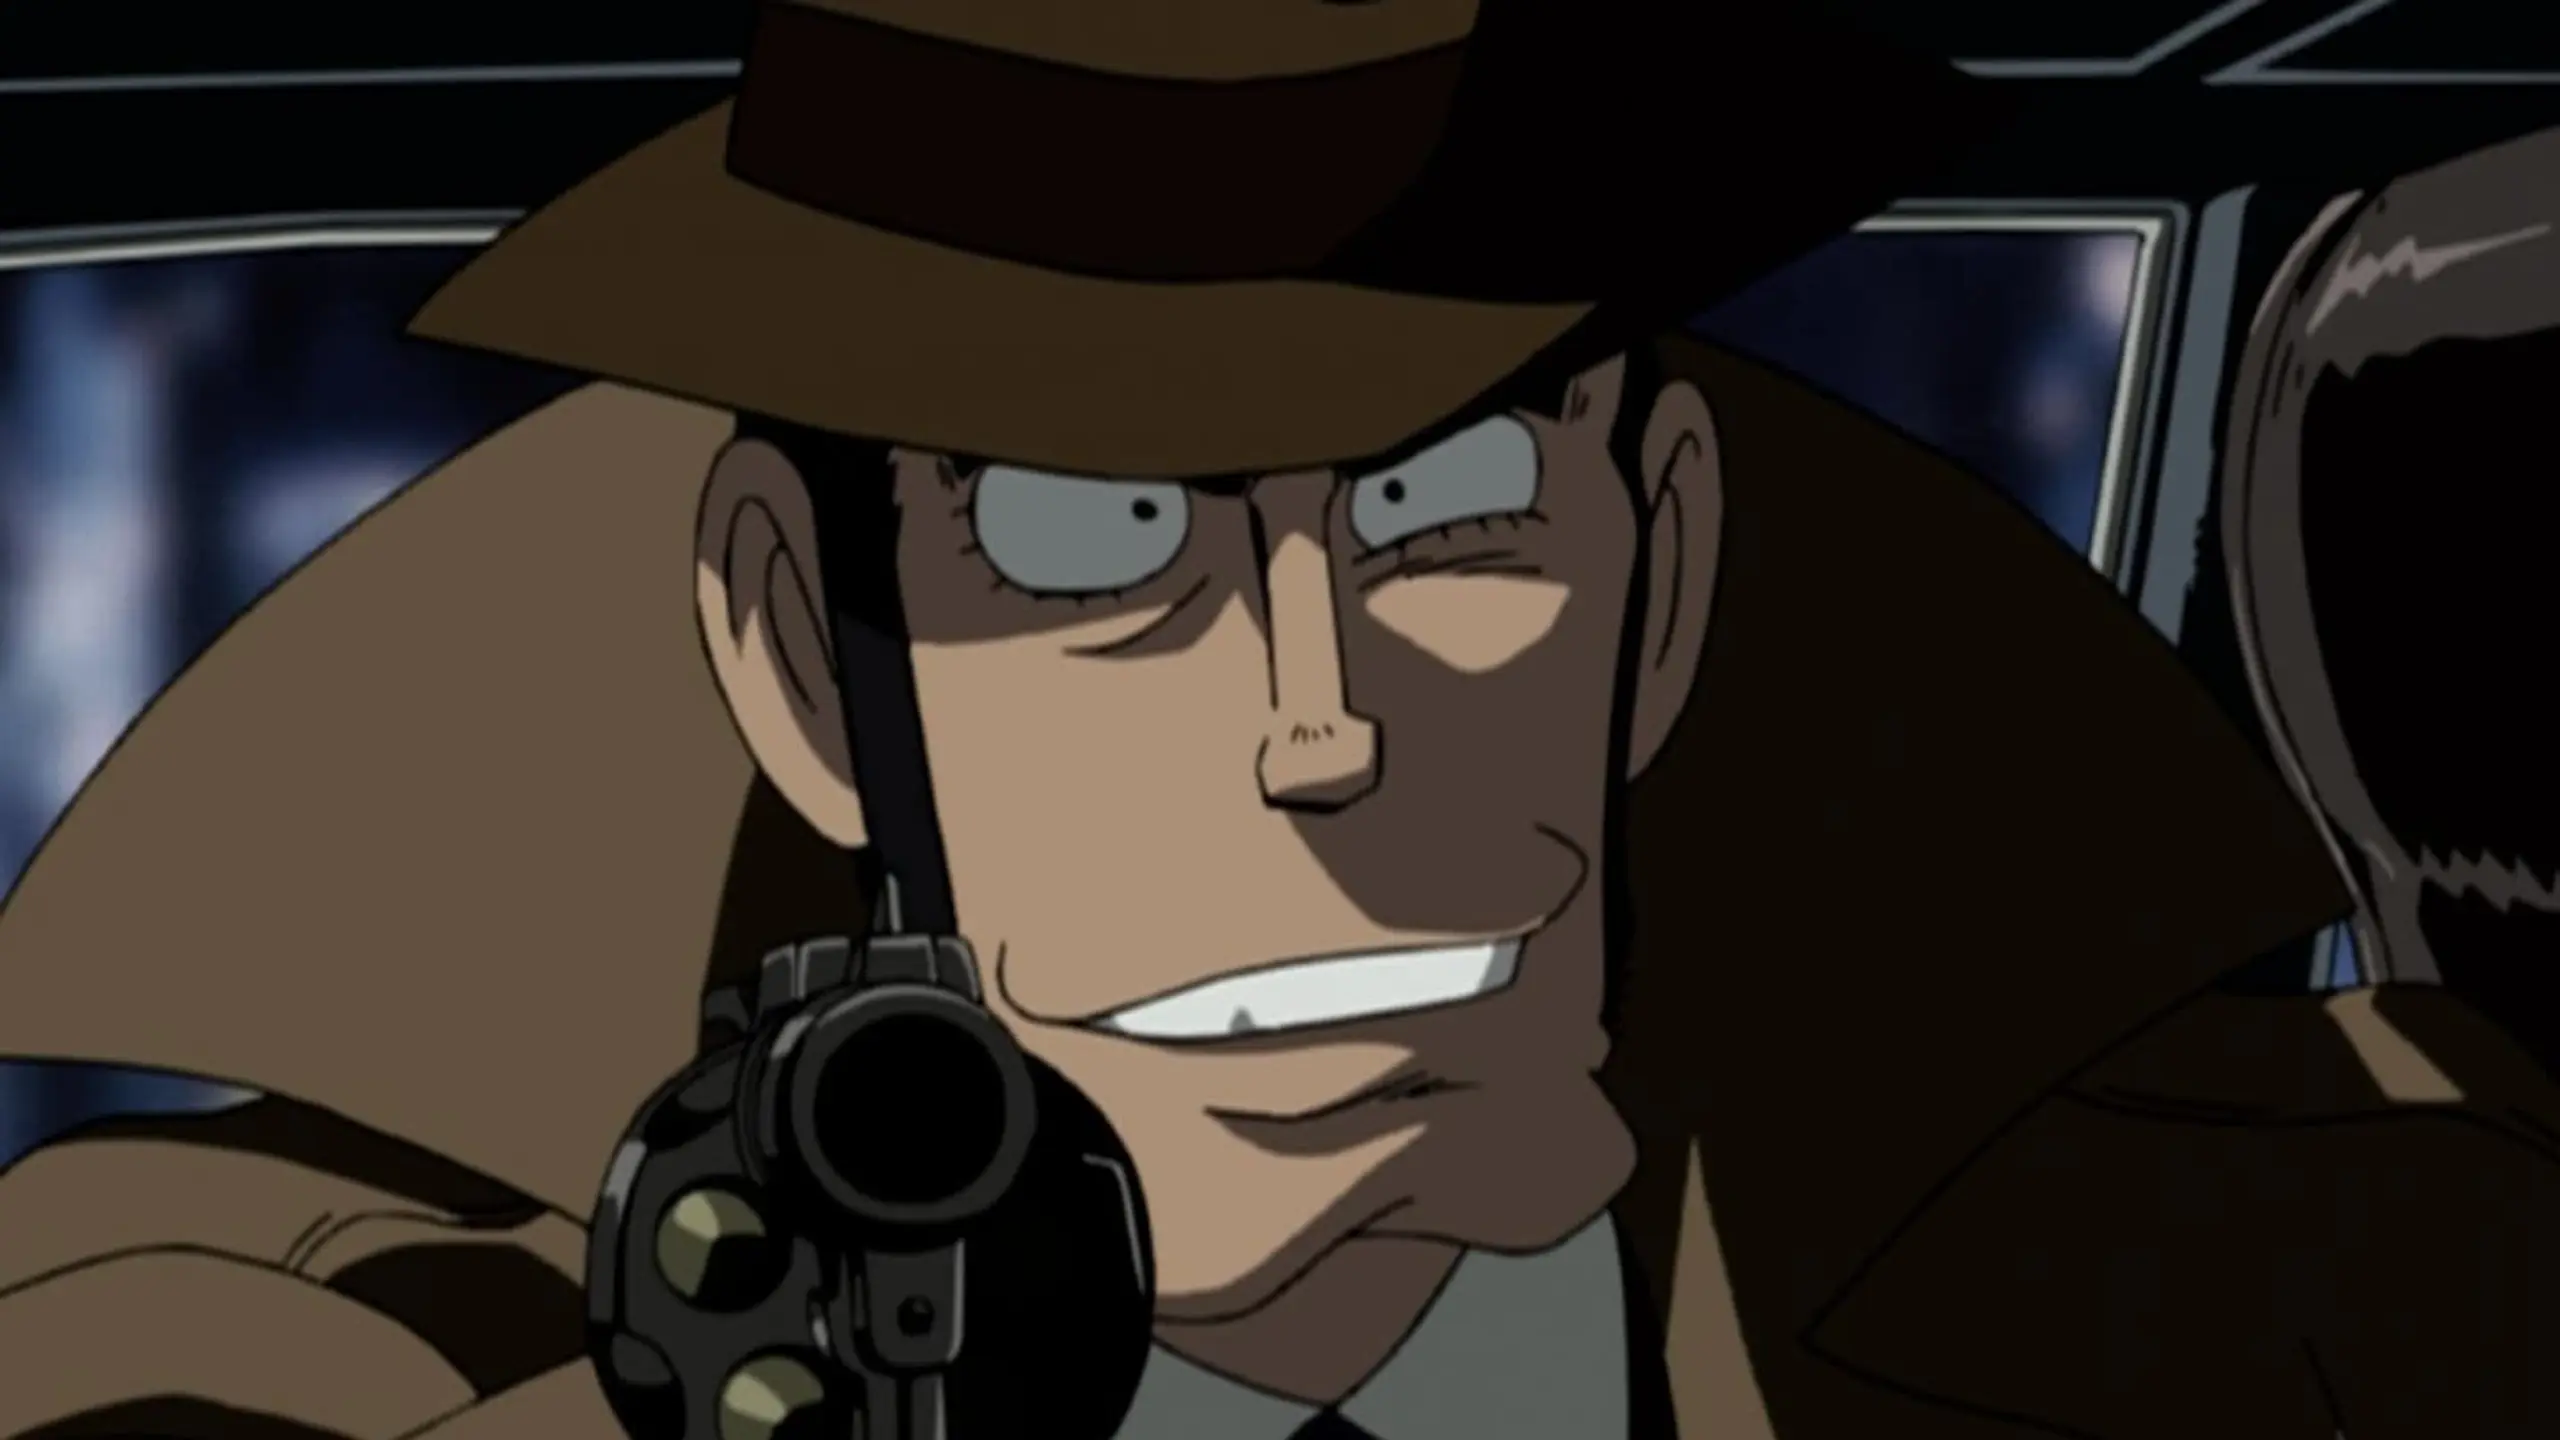 Lupin III: Episode 0: First Contact